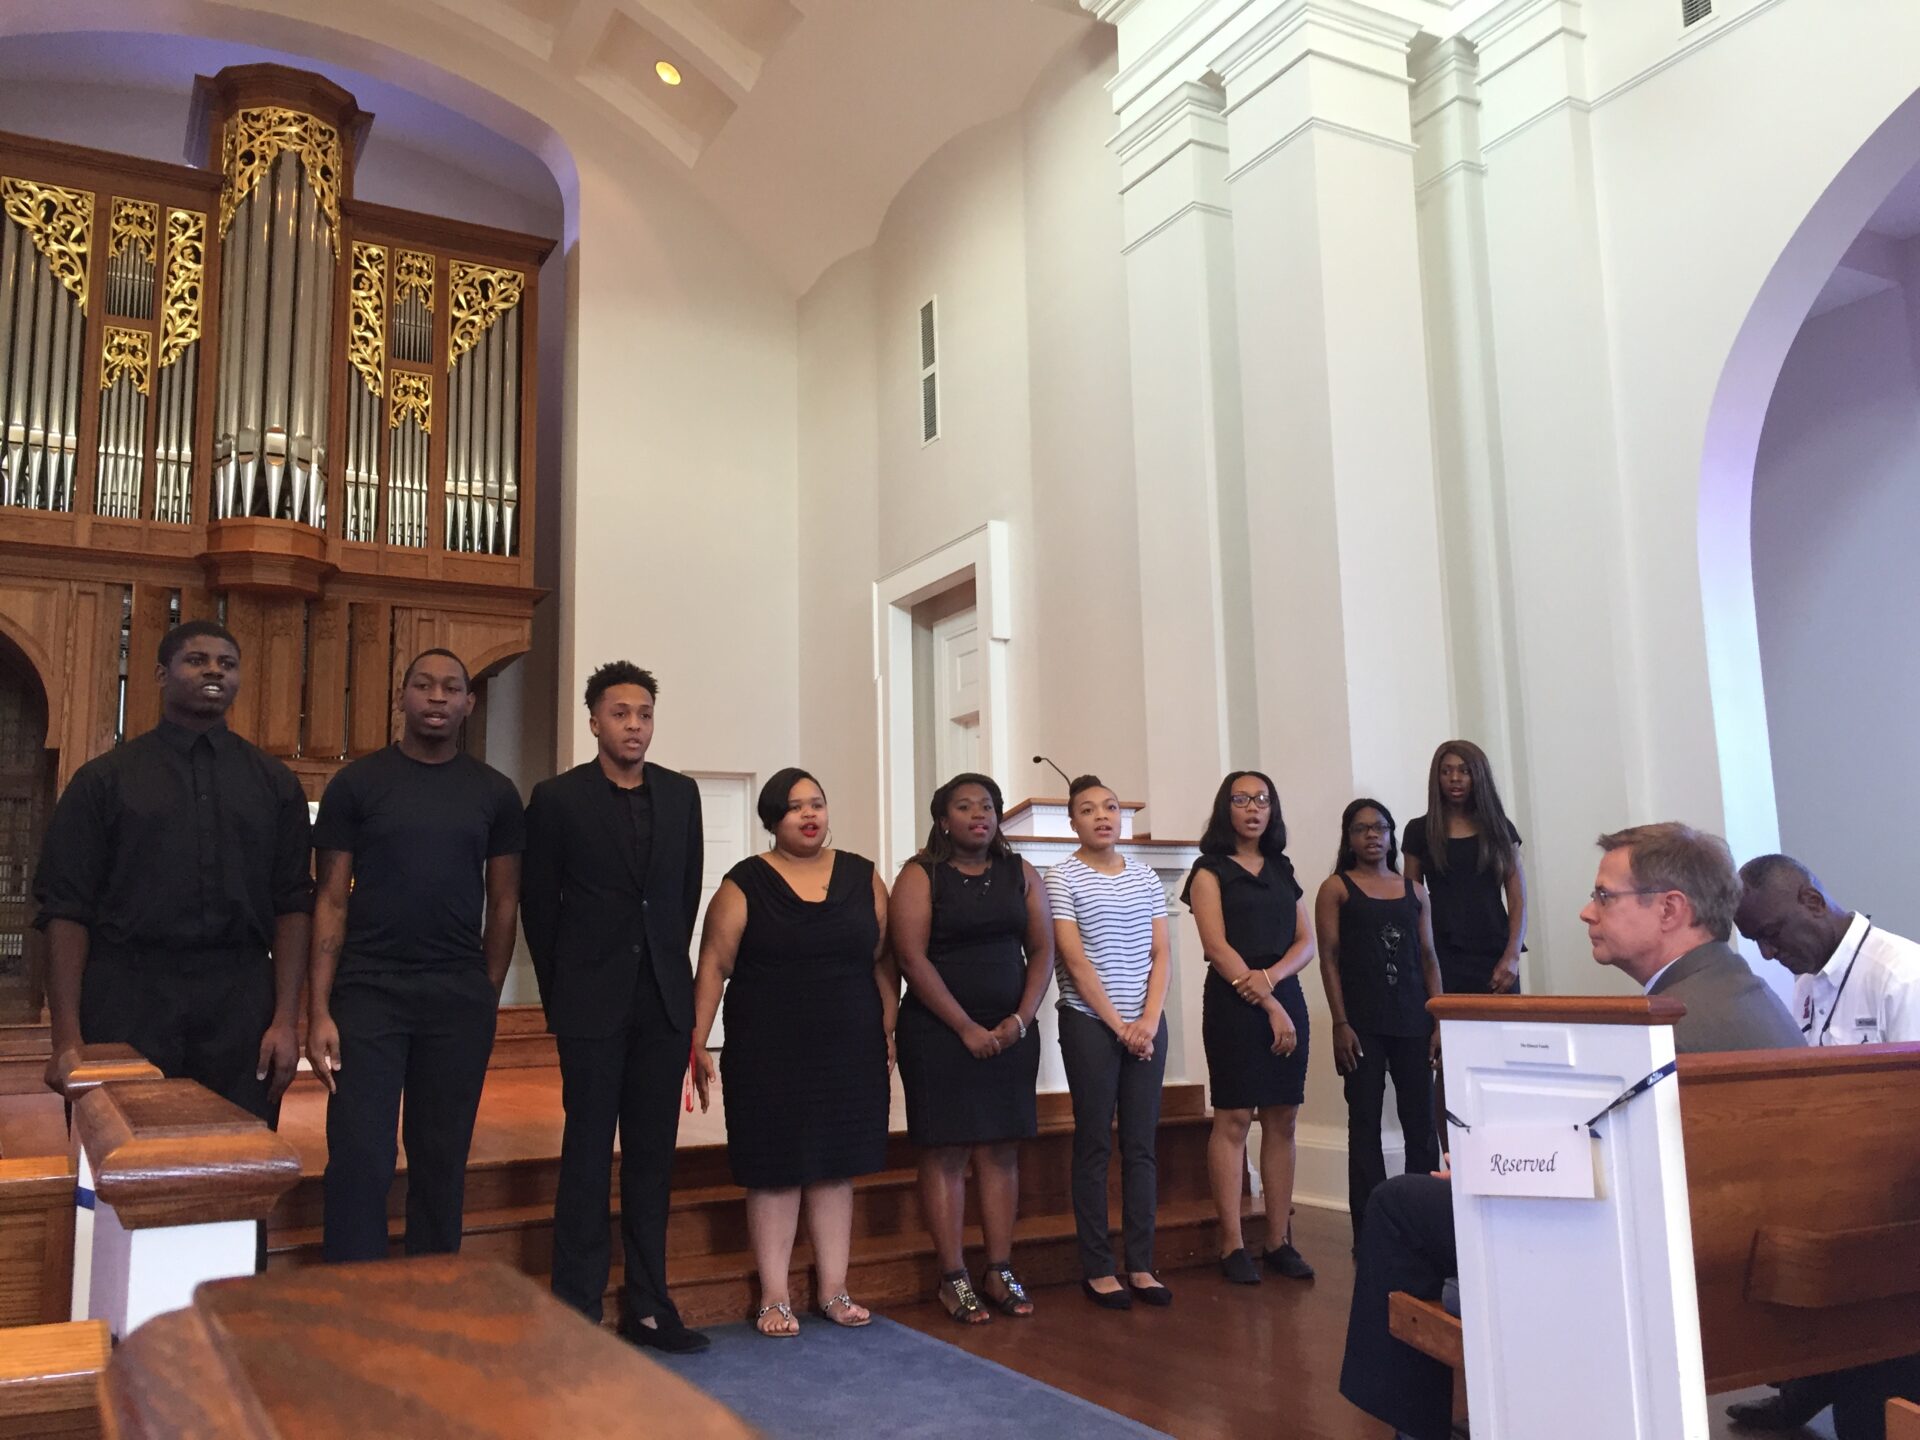 The Ole Miss Gospel Choir belts powerful song about children "coming on board."